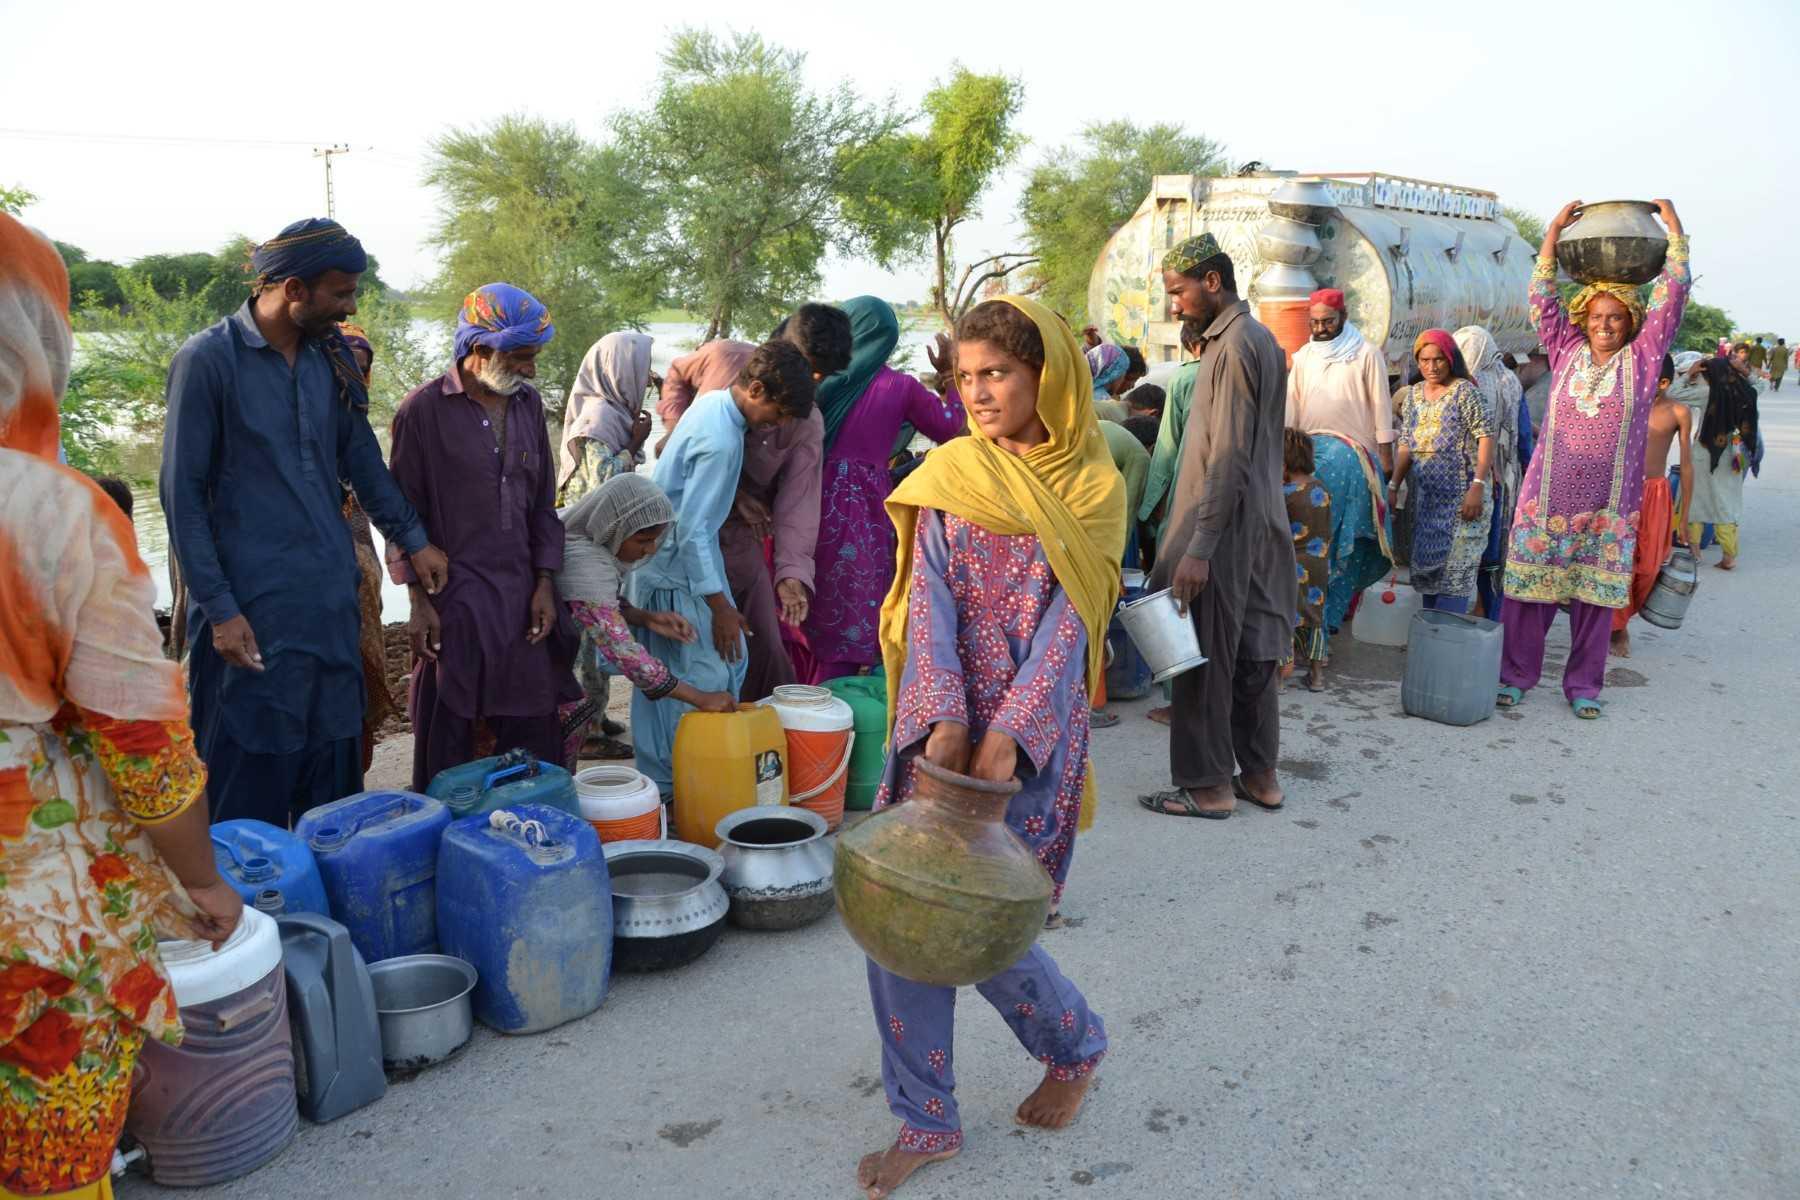 Flood victims gather to collect drinking water from a tanker in a flood-hit area following heavy rains in Dera Allah Yar town in Jaffarabad district, Balochistan province, Pakistan on Sept 6. Photo: AFP